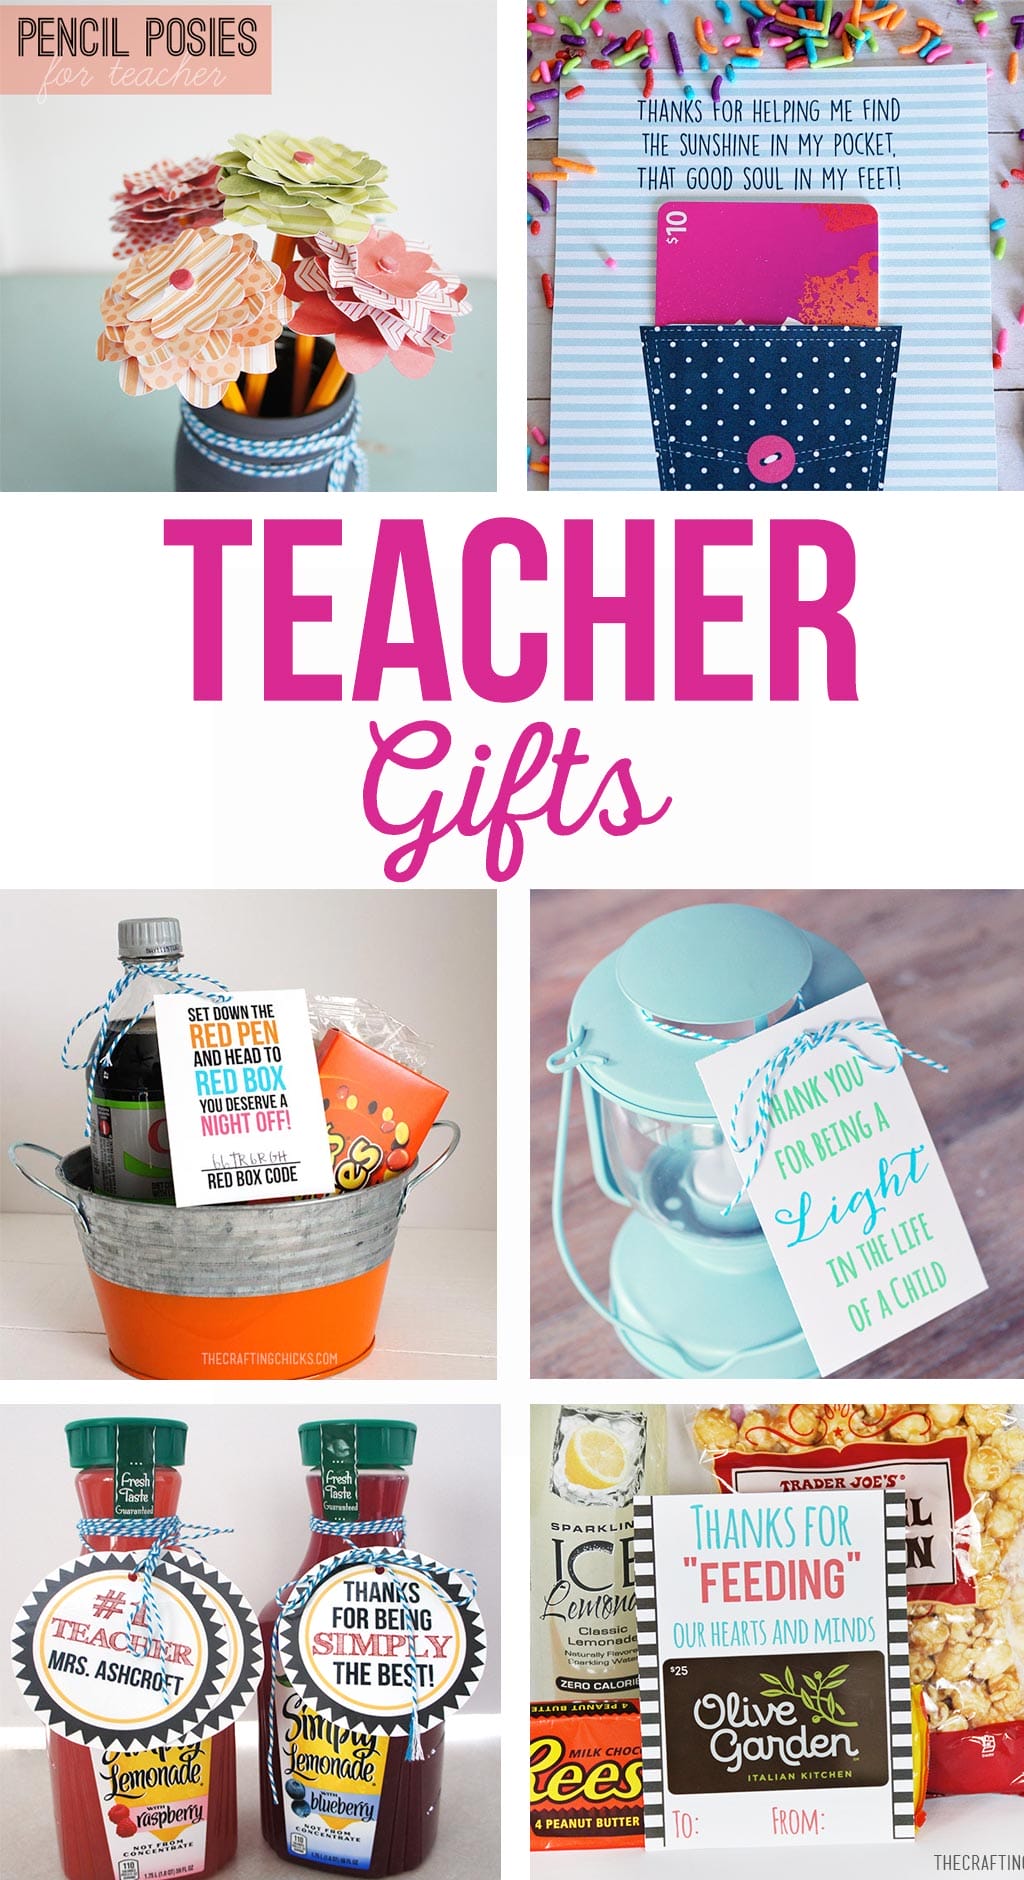 Fun and simple teacher gift ideas that won't break the bank. Free printable teacher gift tags. Gifts for teacher appreciation, end of the year, holidays and birthdays. #teachergifts #teacherappreciation #freeprintables